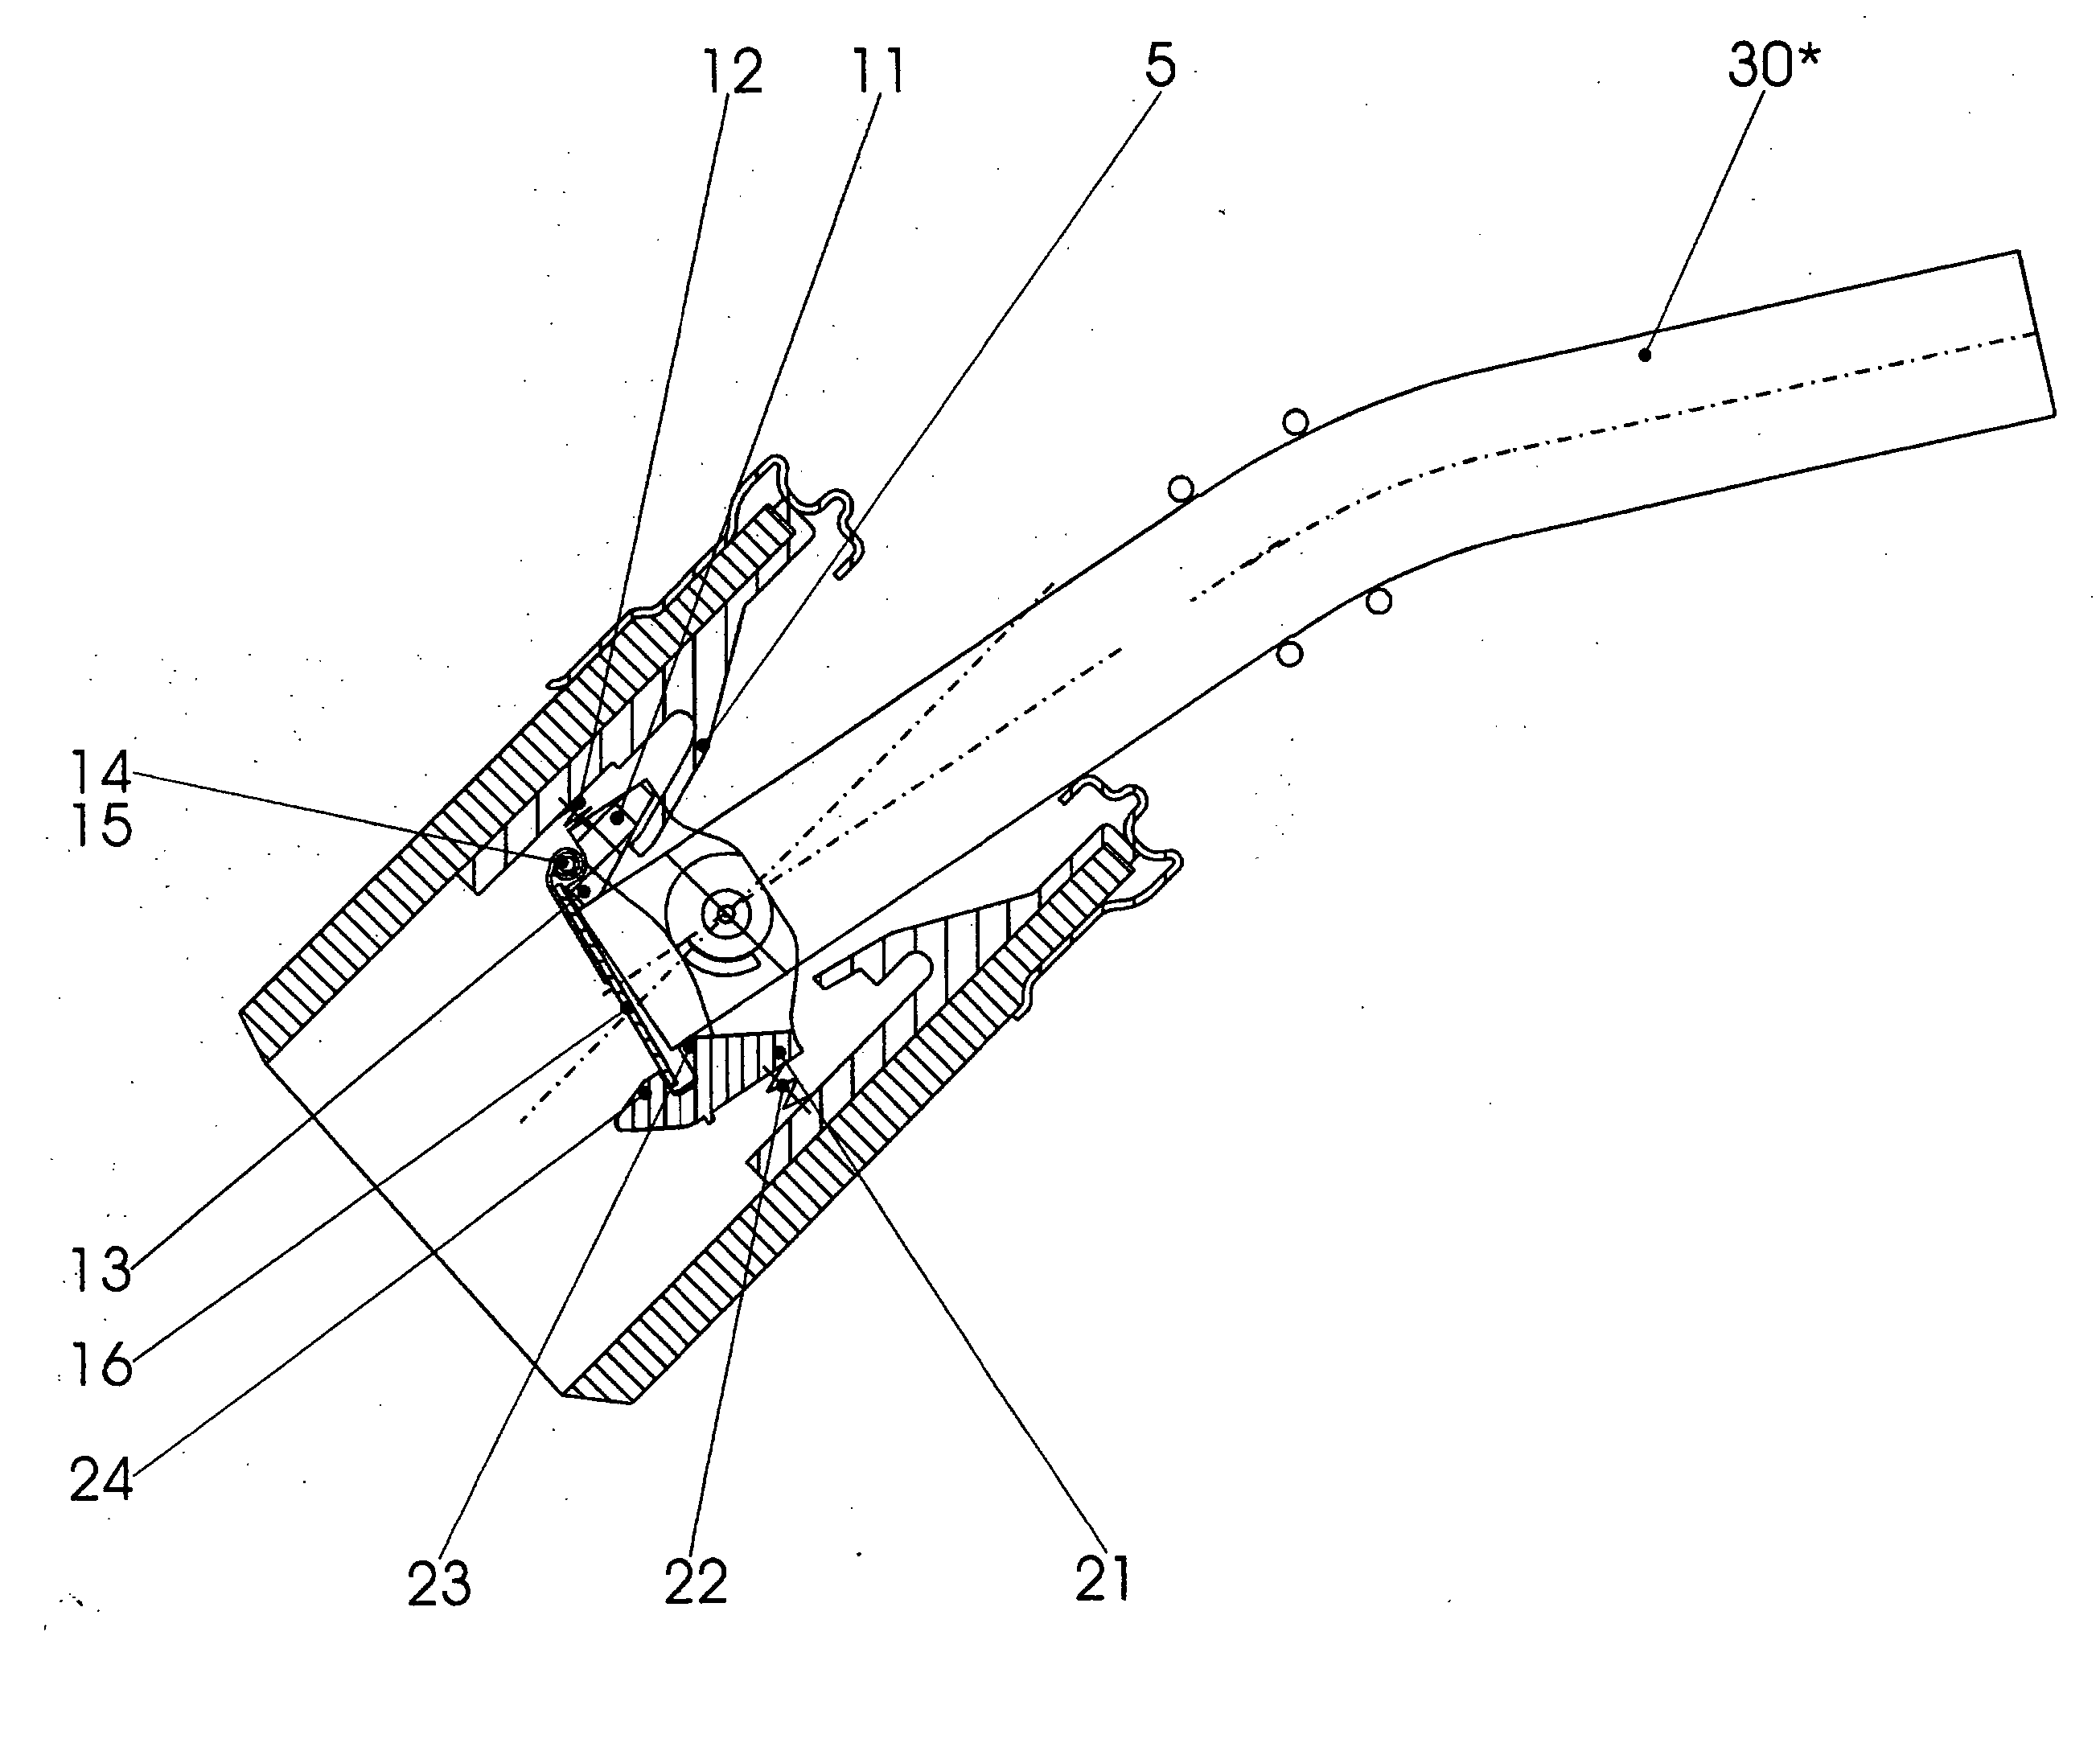 Filler Tube For The Fuel Tank Of A Motor Vehicle With Selective Opening